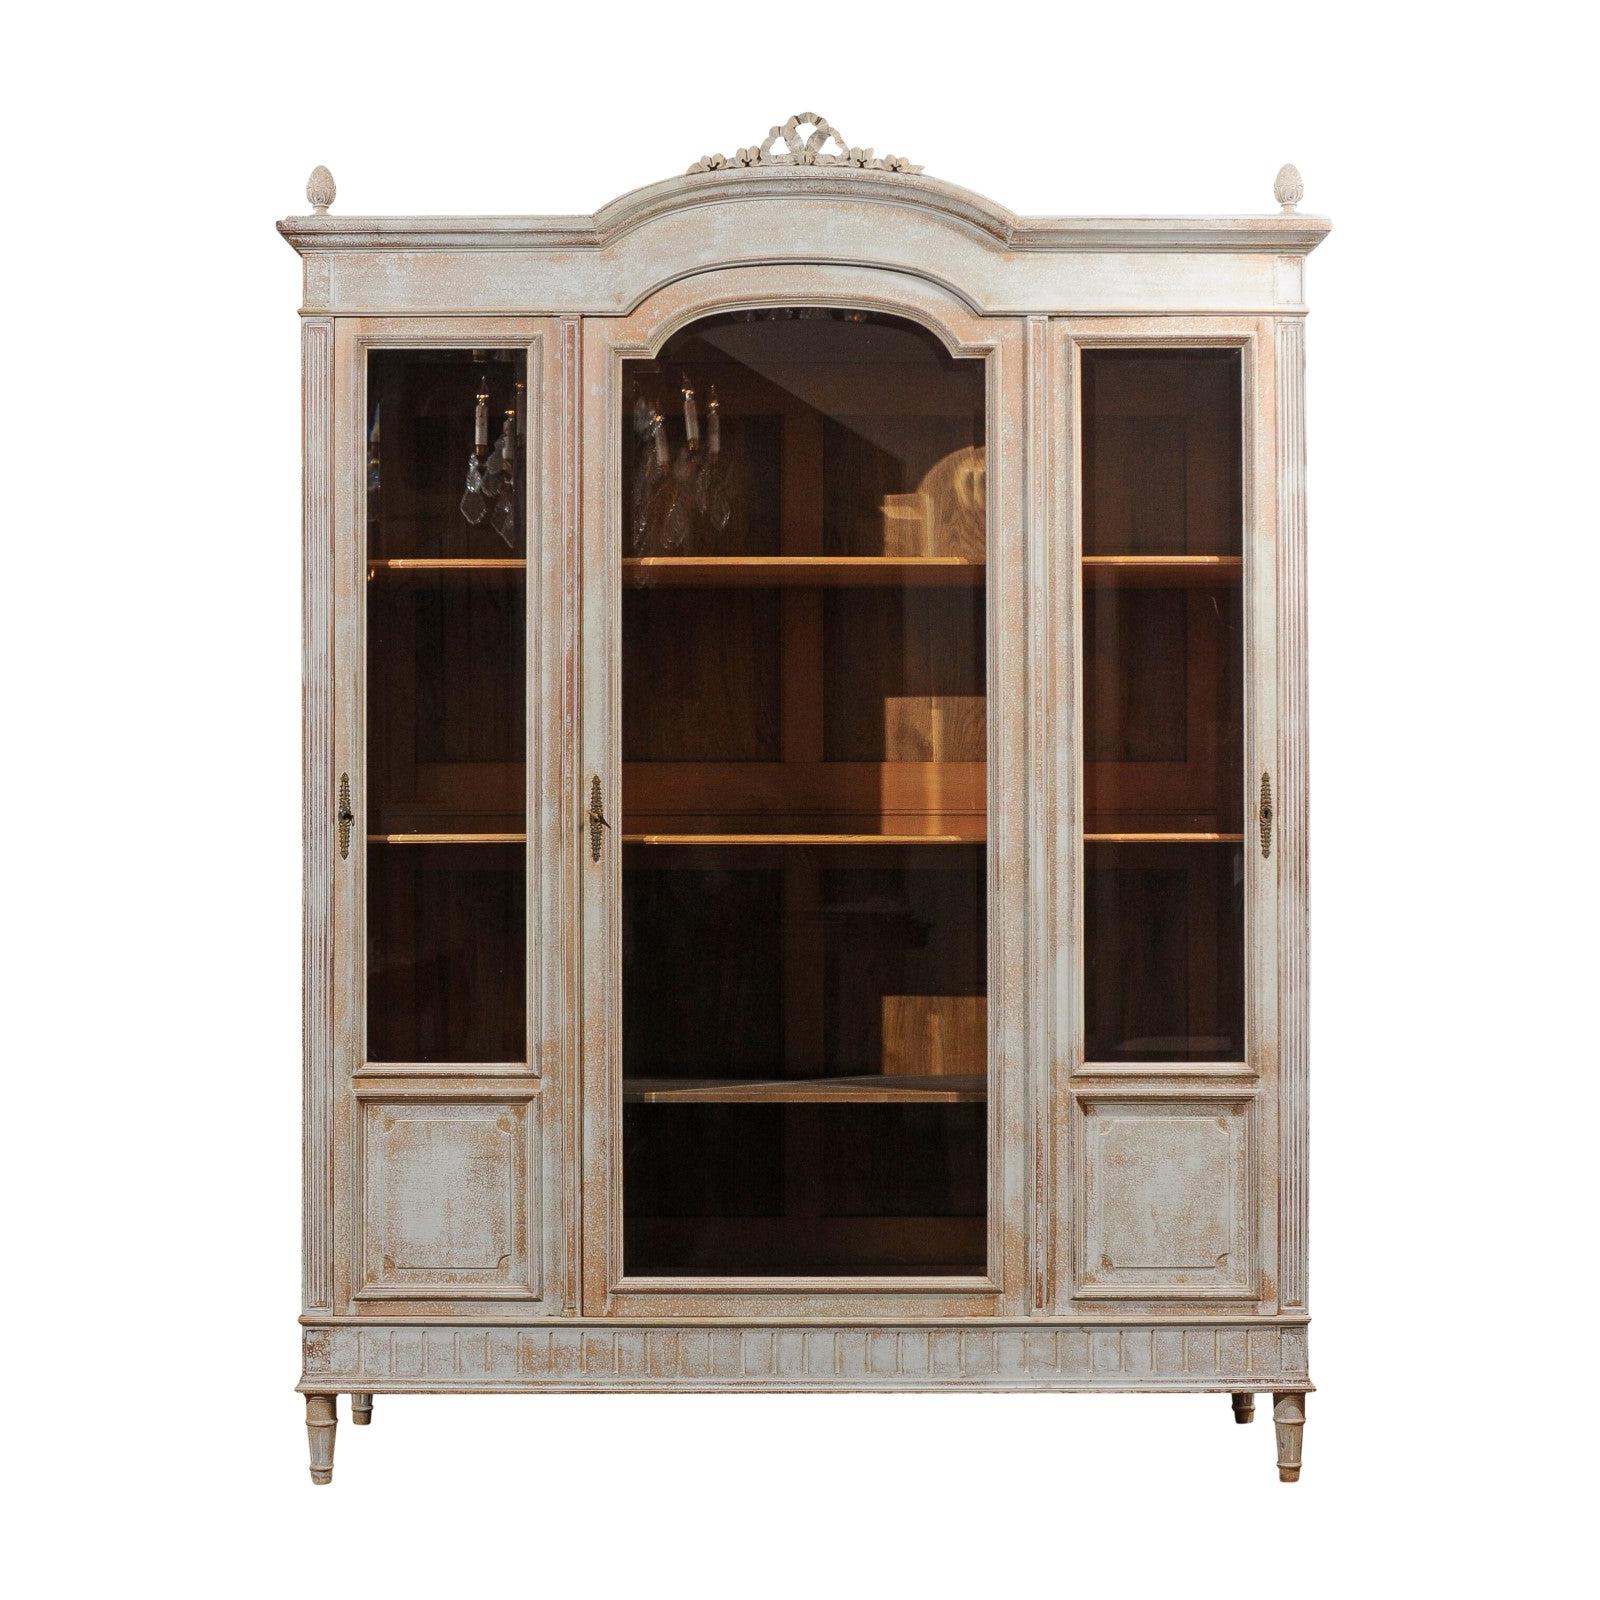 French Louis XVI Style Painted Wood Cabinet with Glass Doors and Bonnet Cornice